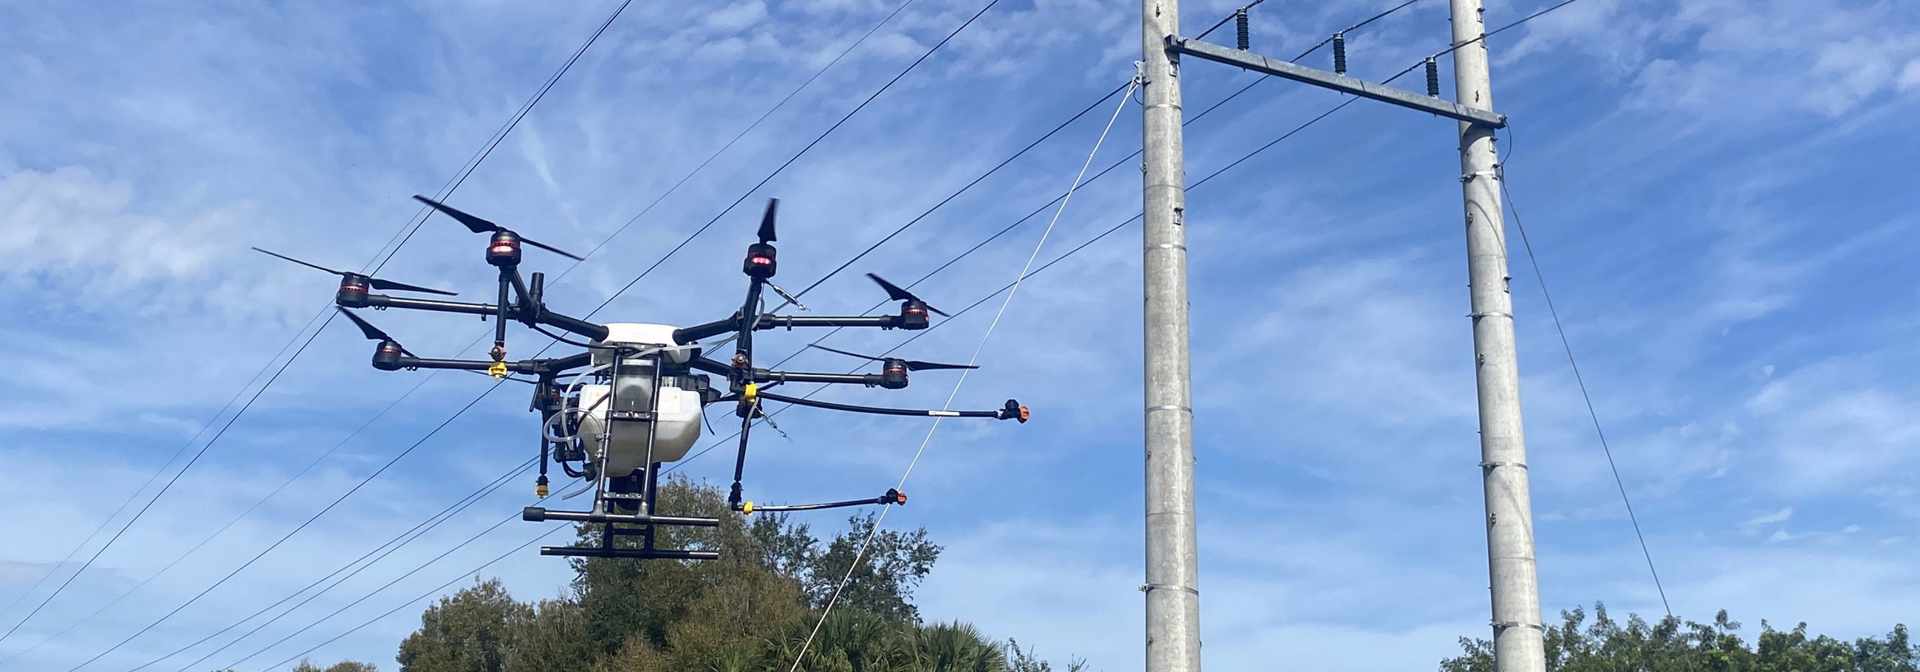 Drone & Utility Lines